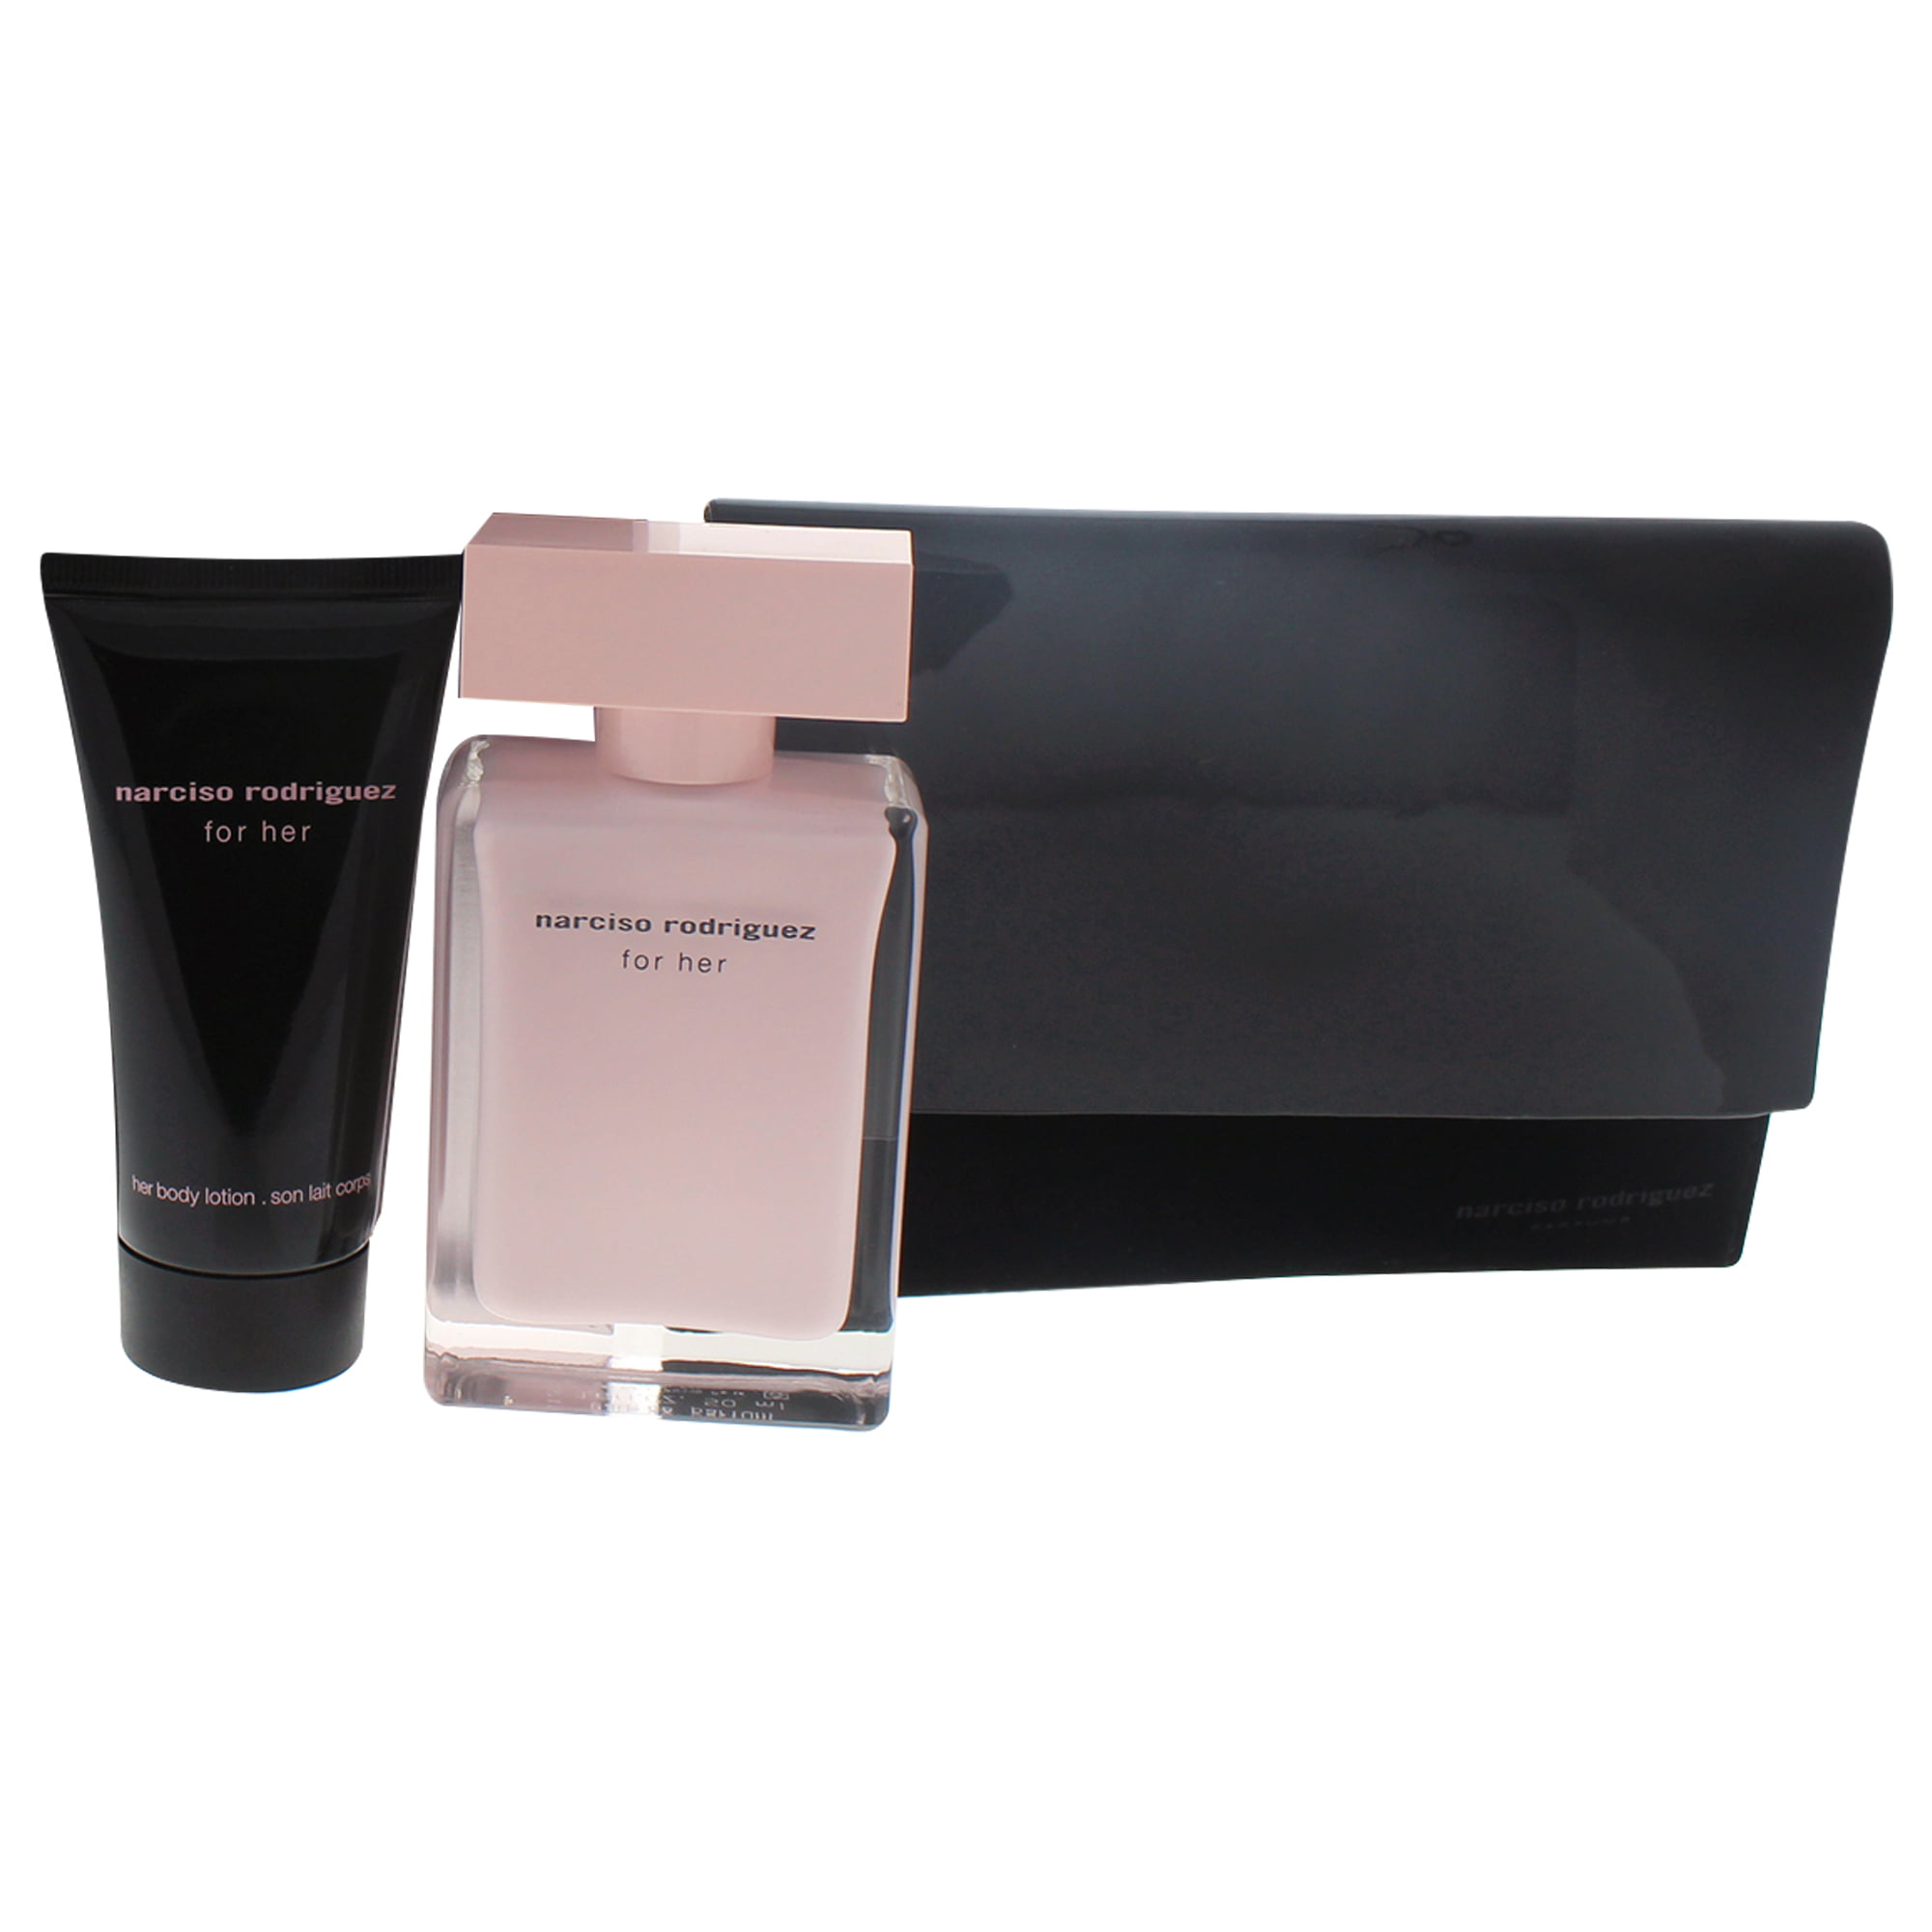 Narciso Rodriguez Narciso Rodriguez for Her 1.6oz Eau De Parfum Spray,  1.6oz Body Lotion, Pouch 3 Pc Gift Set